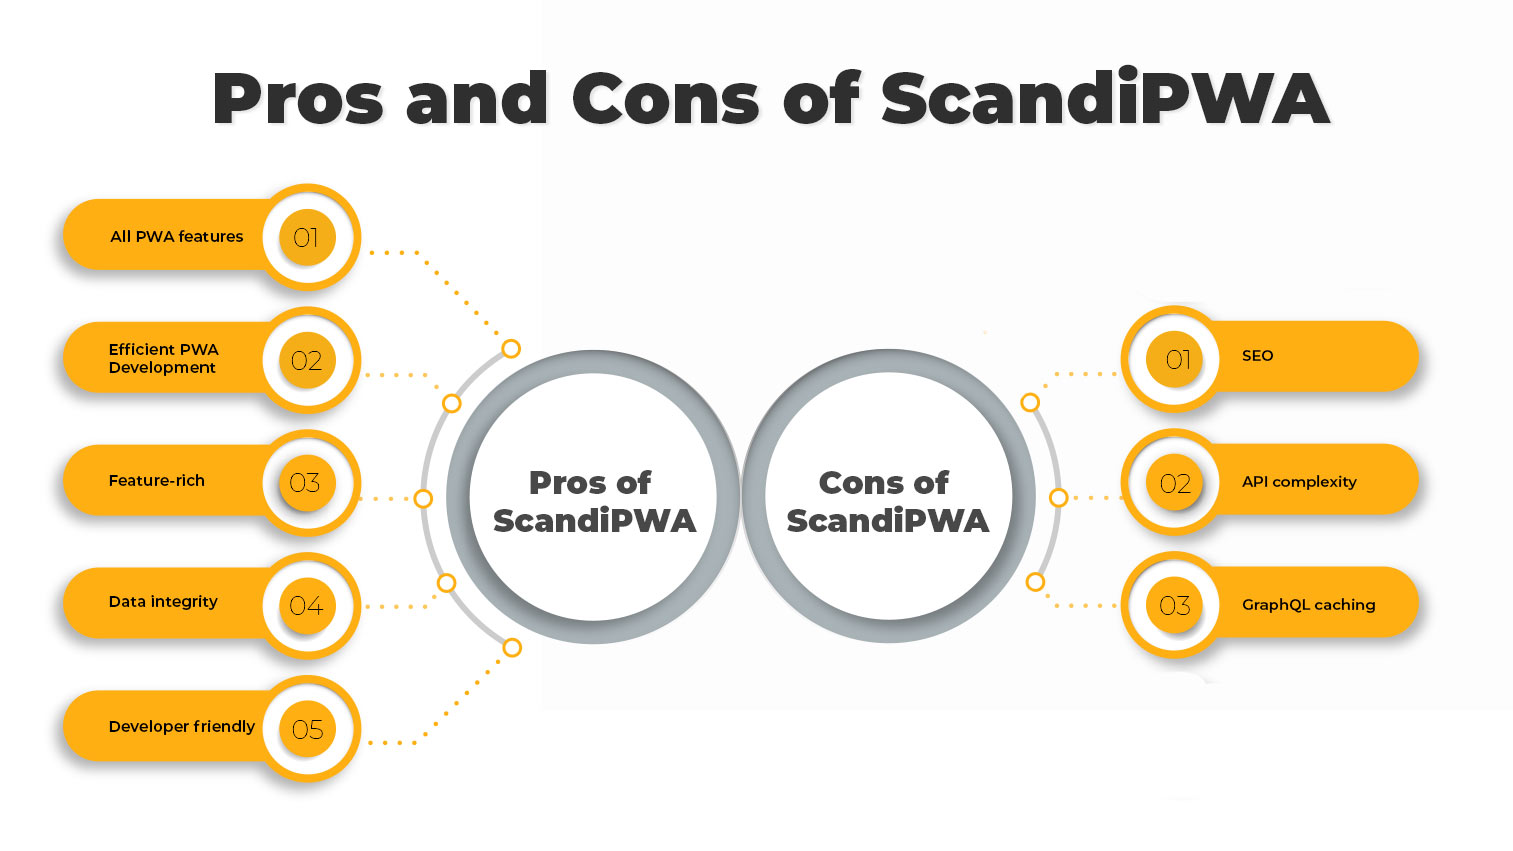 Pros and cons of ScandiPWA